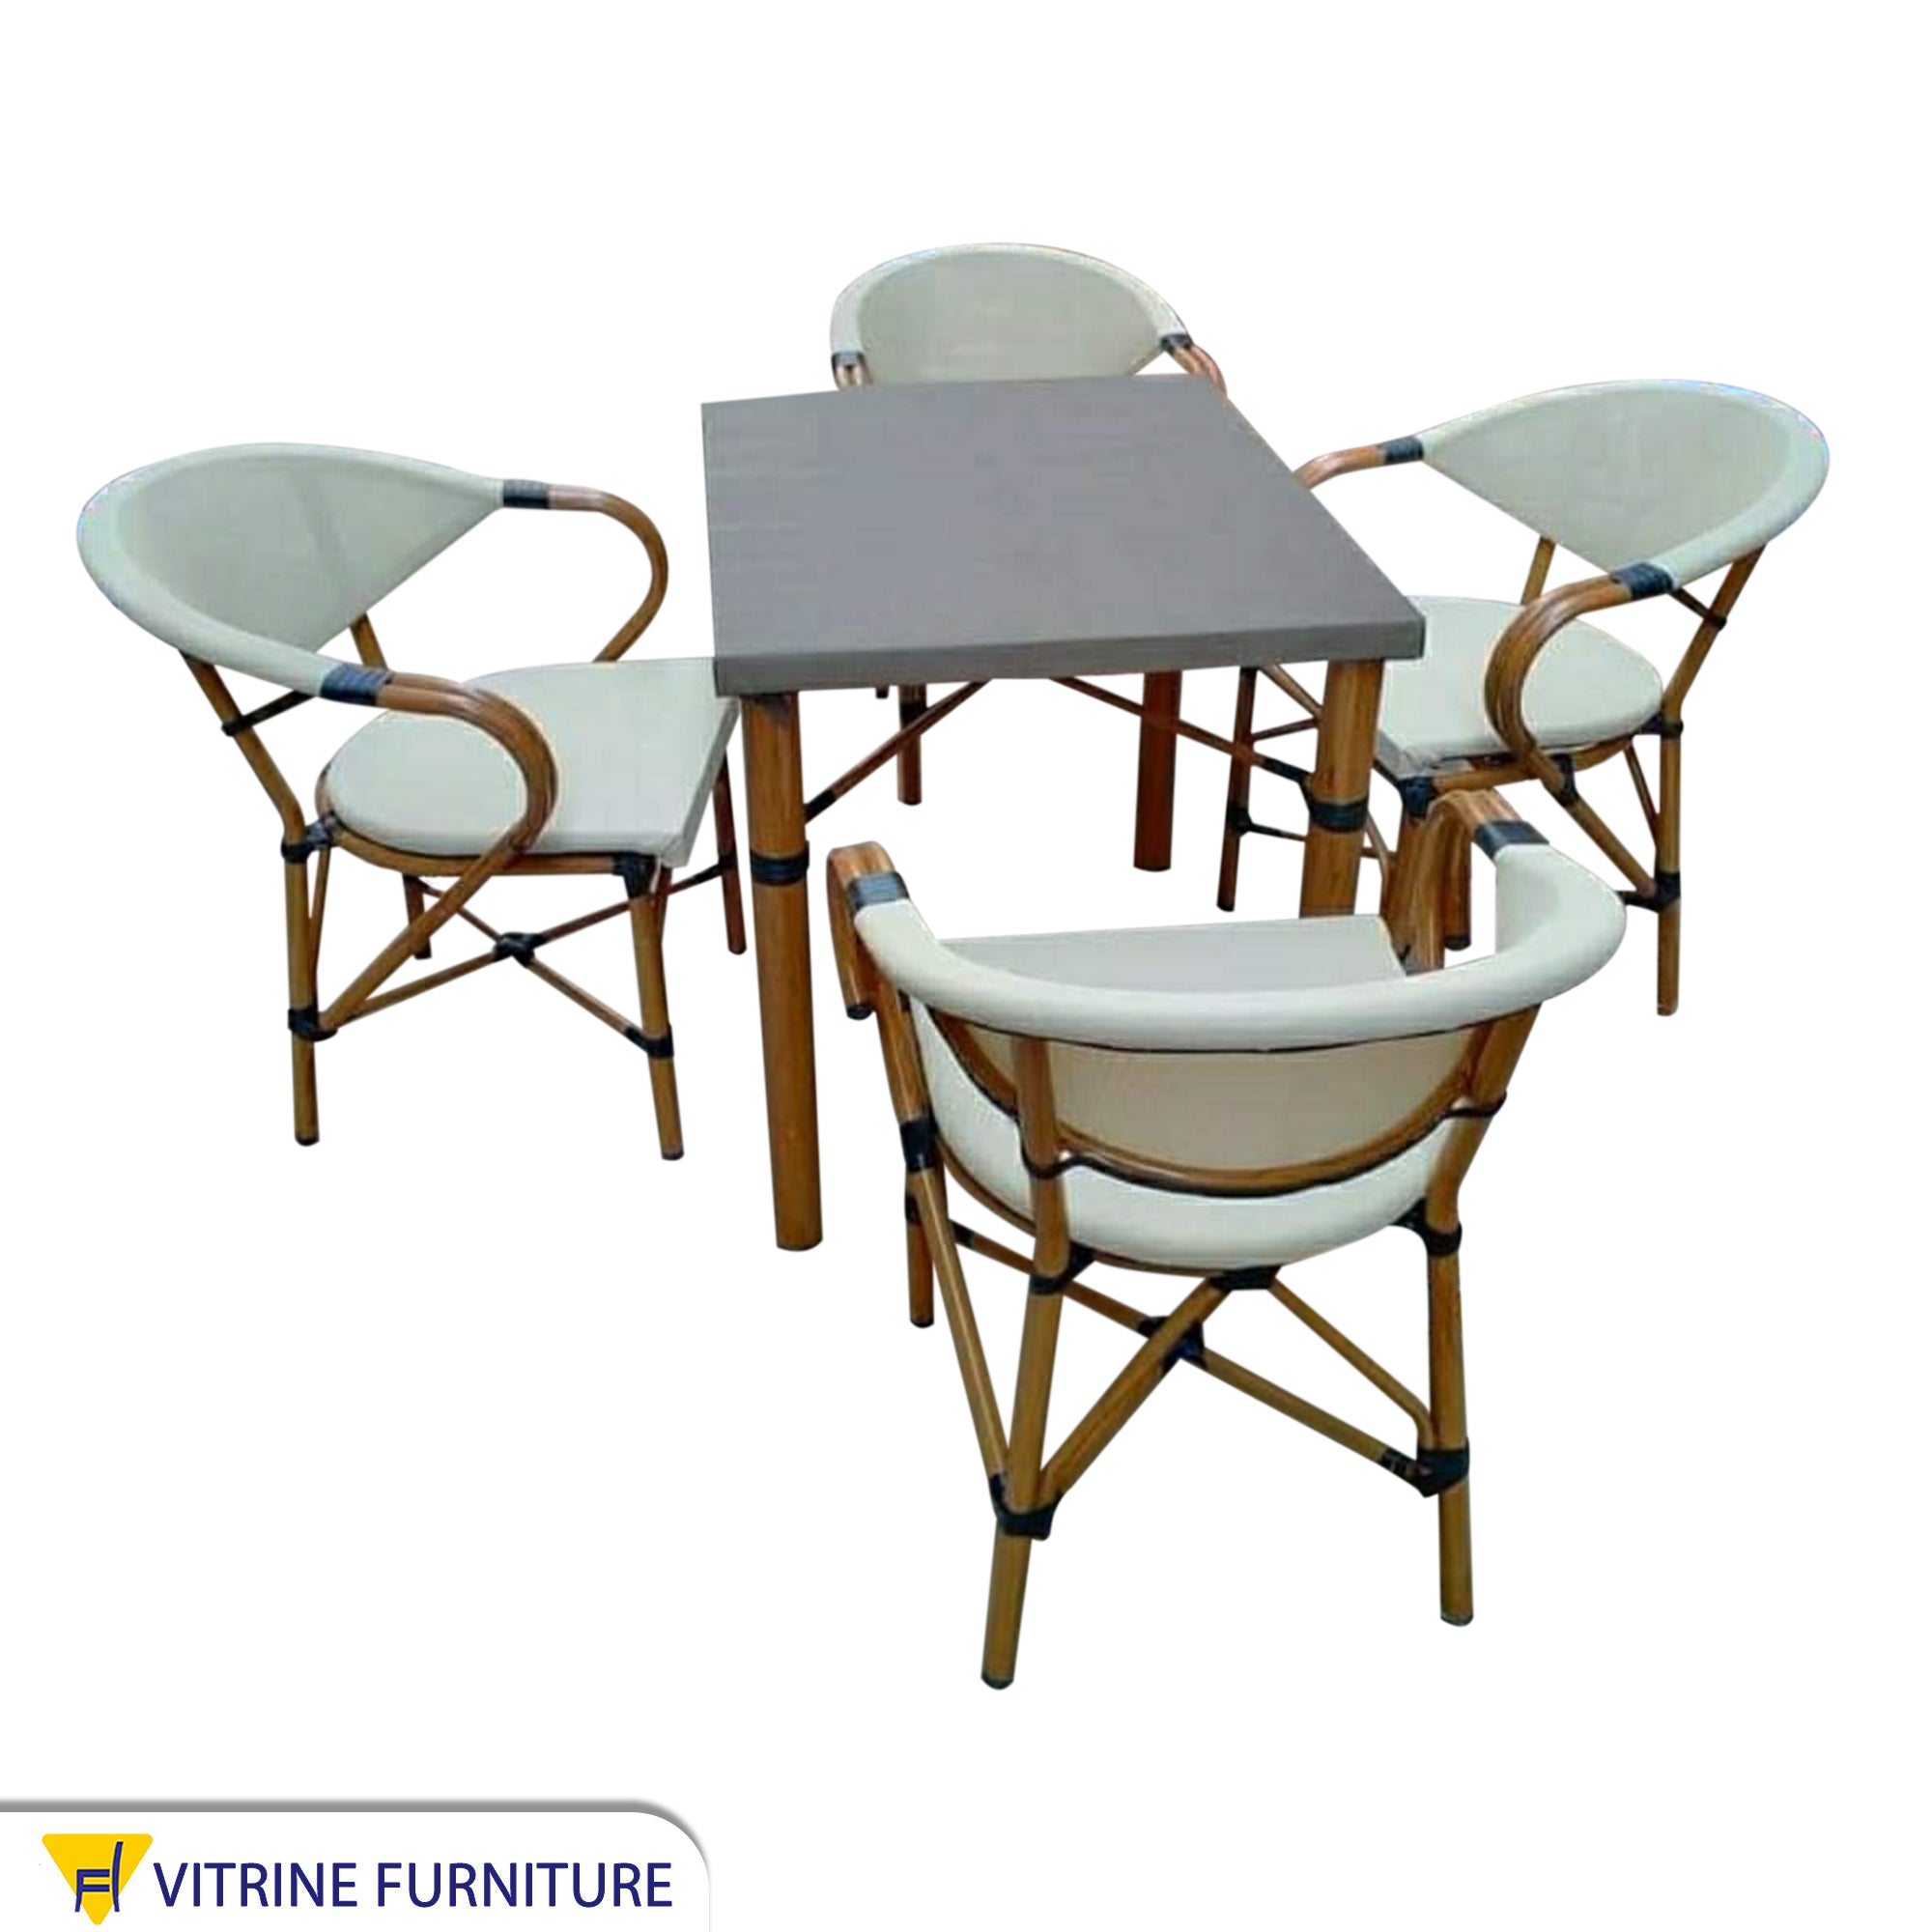 A small dining table with four chairs and a table